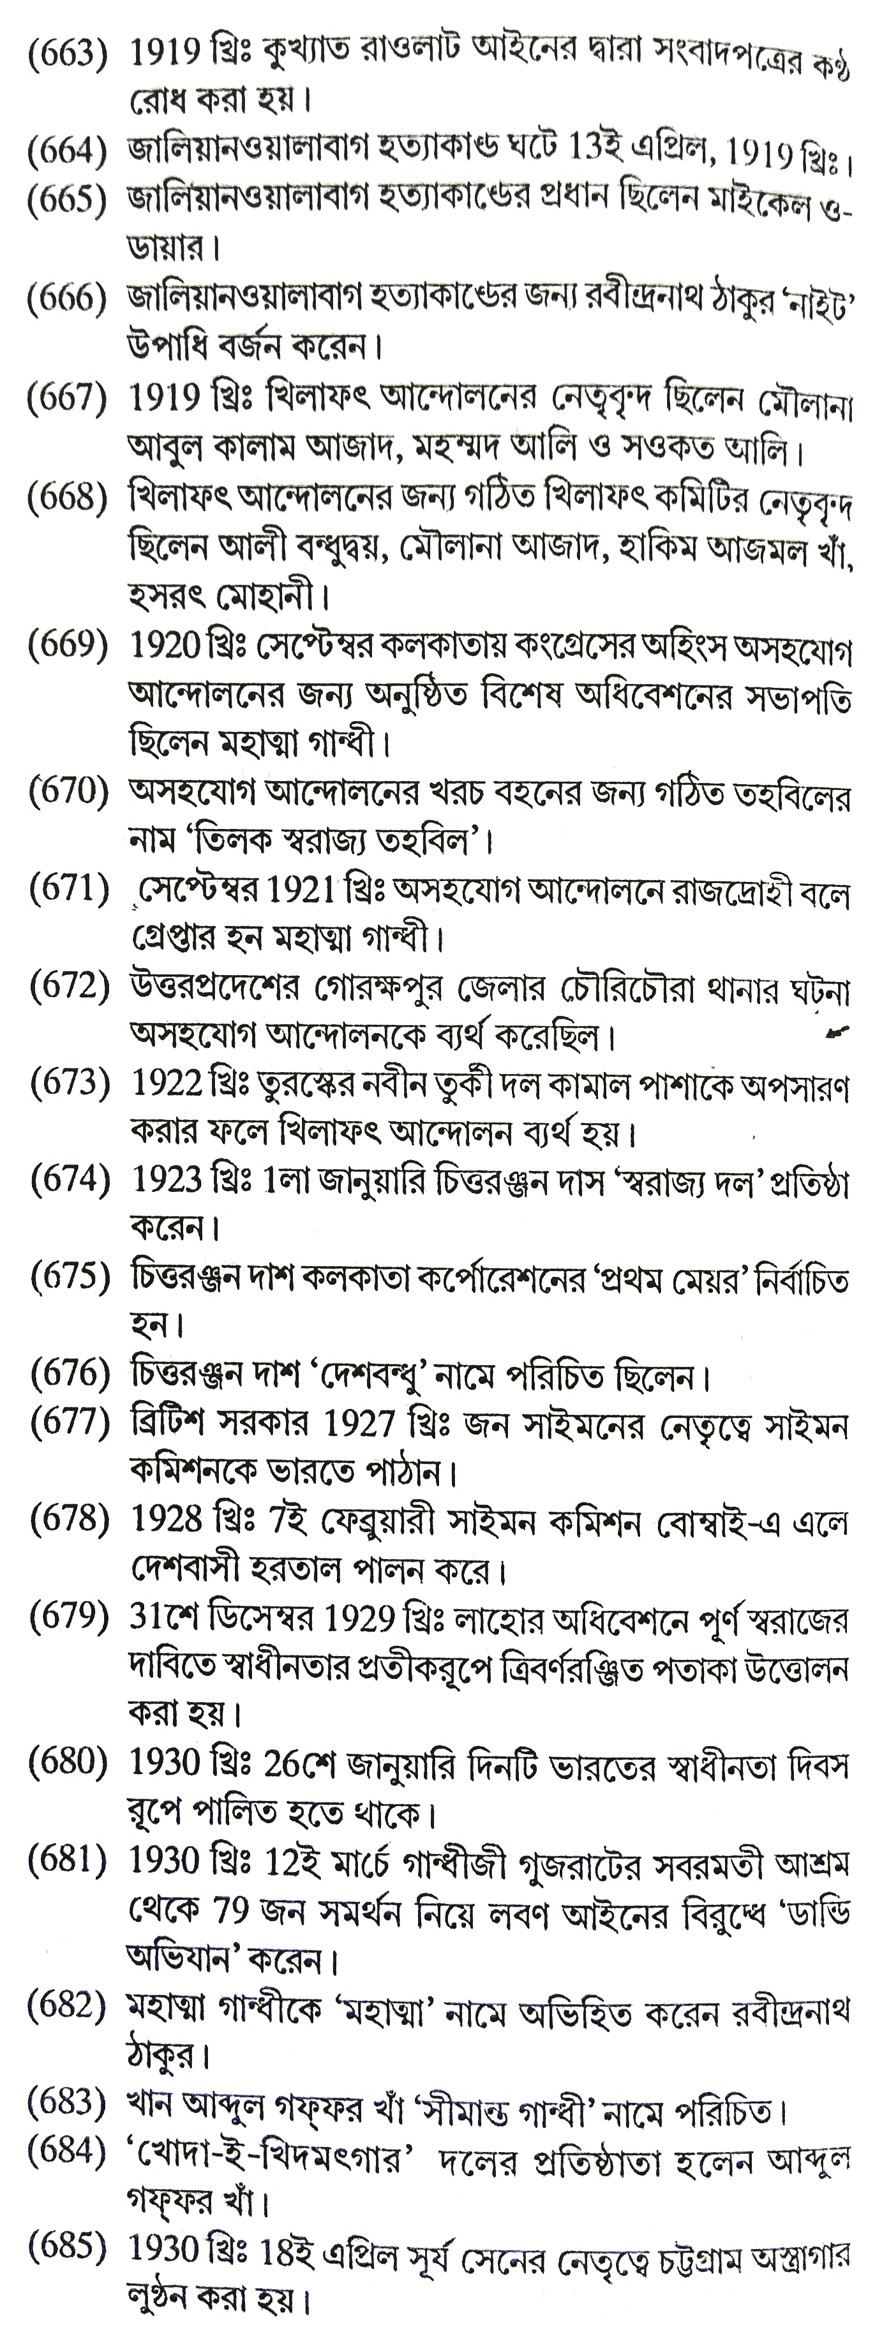 History of India-770+ One-liner Question Answer - WBCS Notebook